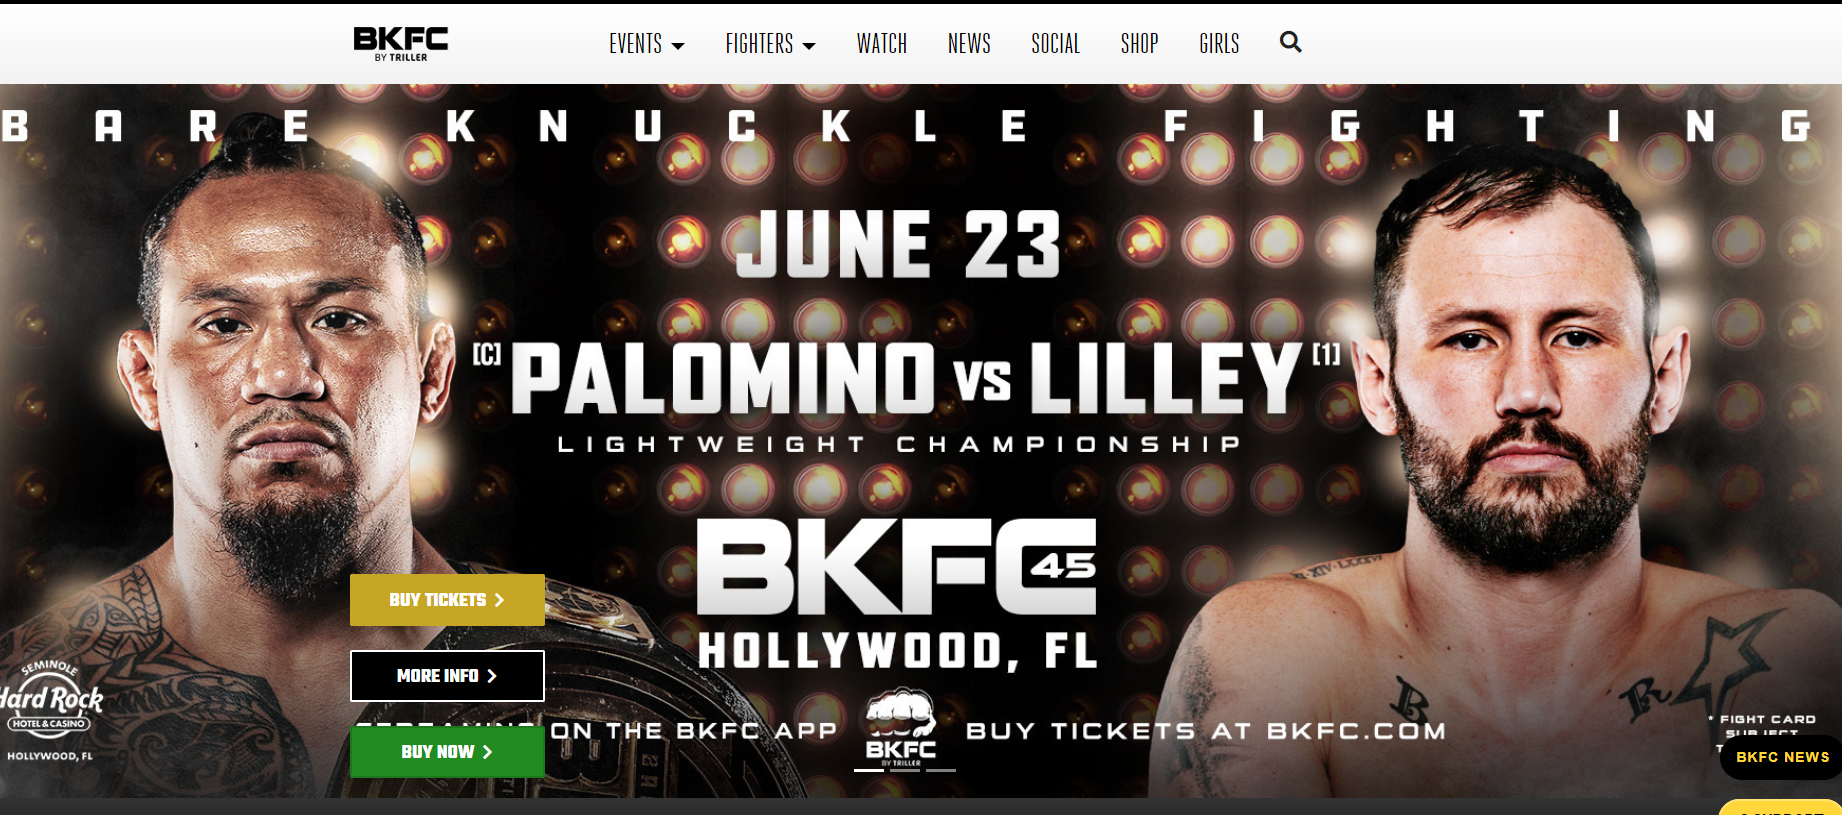 BKFC Fight Cards, Watch Times, Live Event Stats